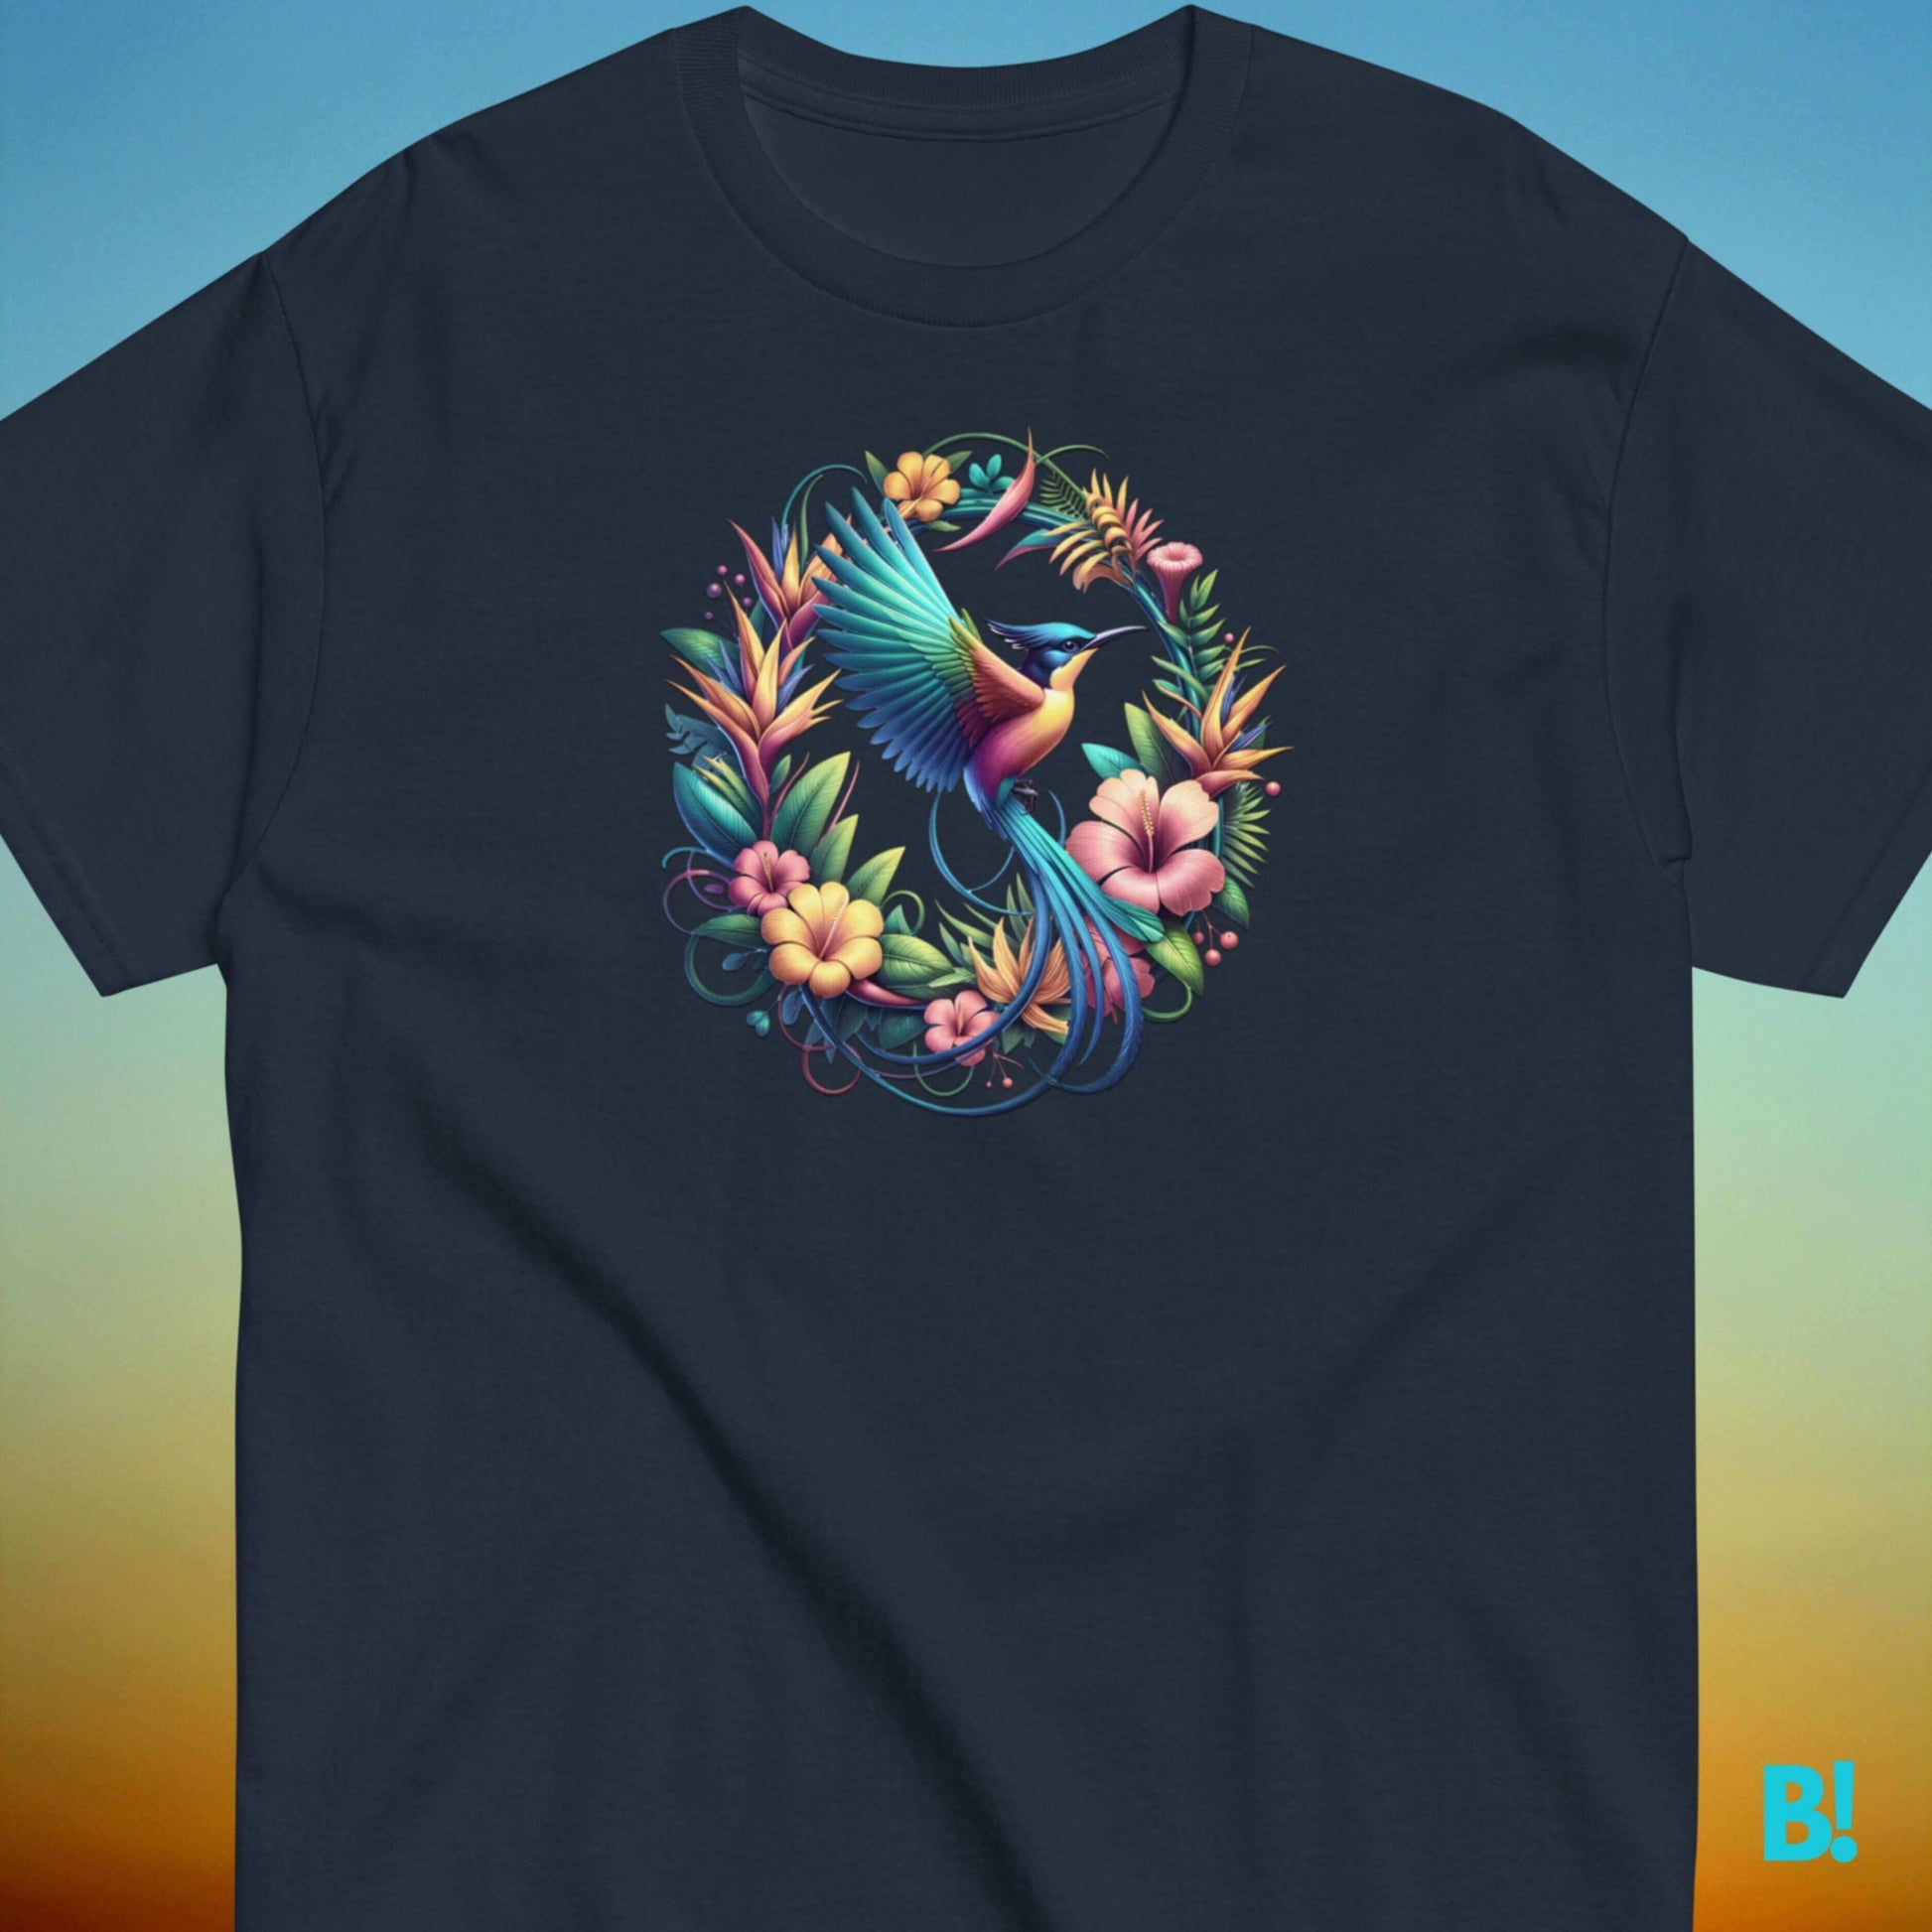 Bird of Paradise Tee: Tropical Island Style Tshirt Dive into tropical style with our Bird of Paradise tee! Perfect beachwear in 6 colors & sizes S-XXXL. Embrace island vibes in comfort. €29.50 B!NKY Comfywear